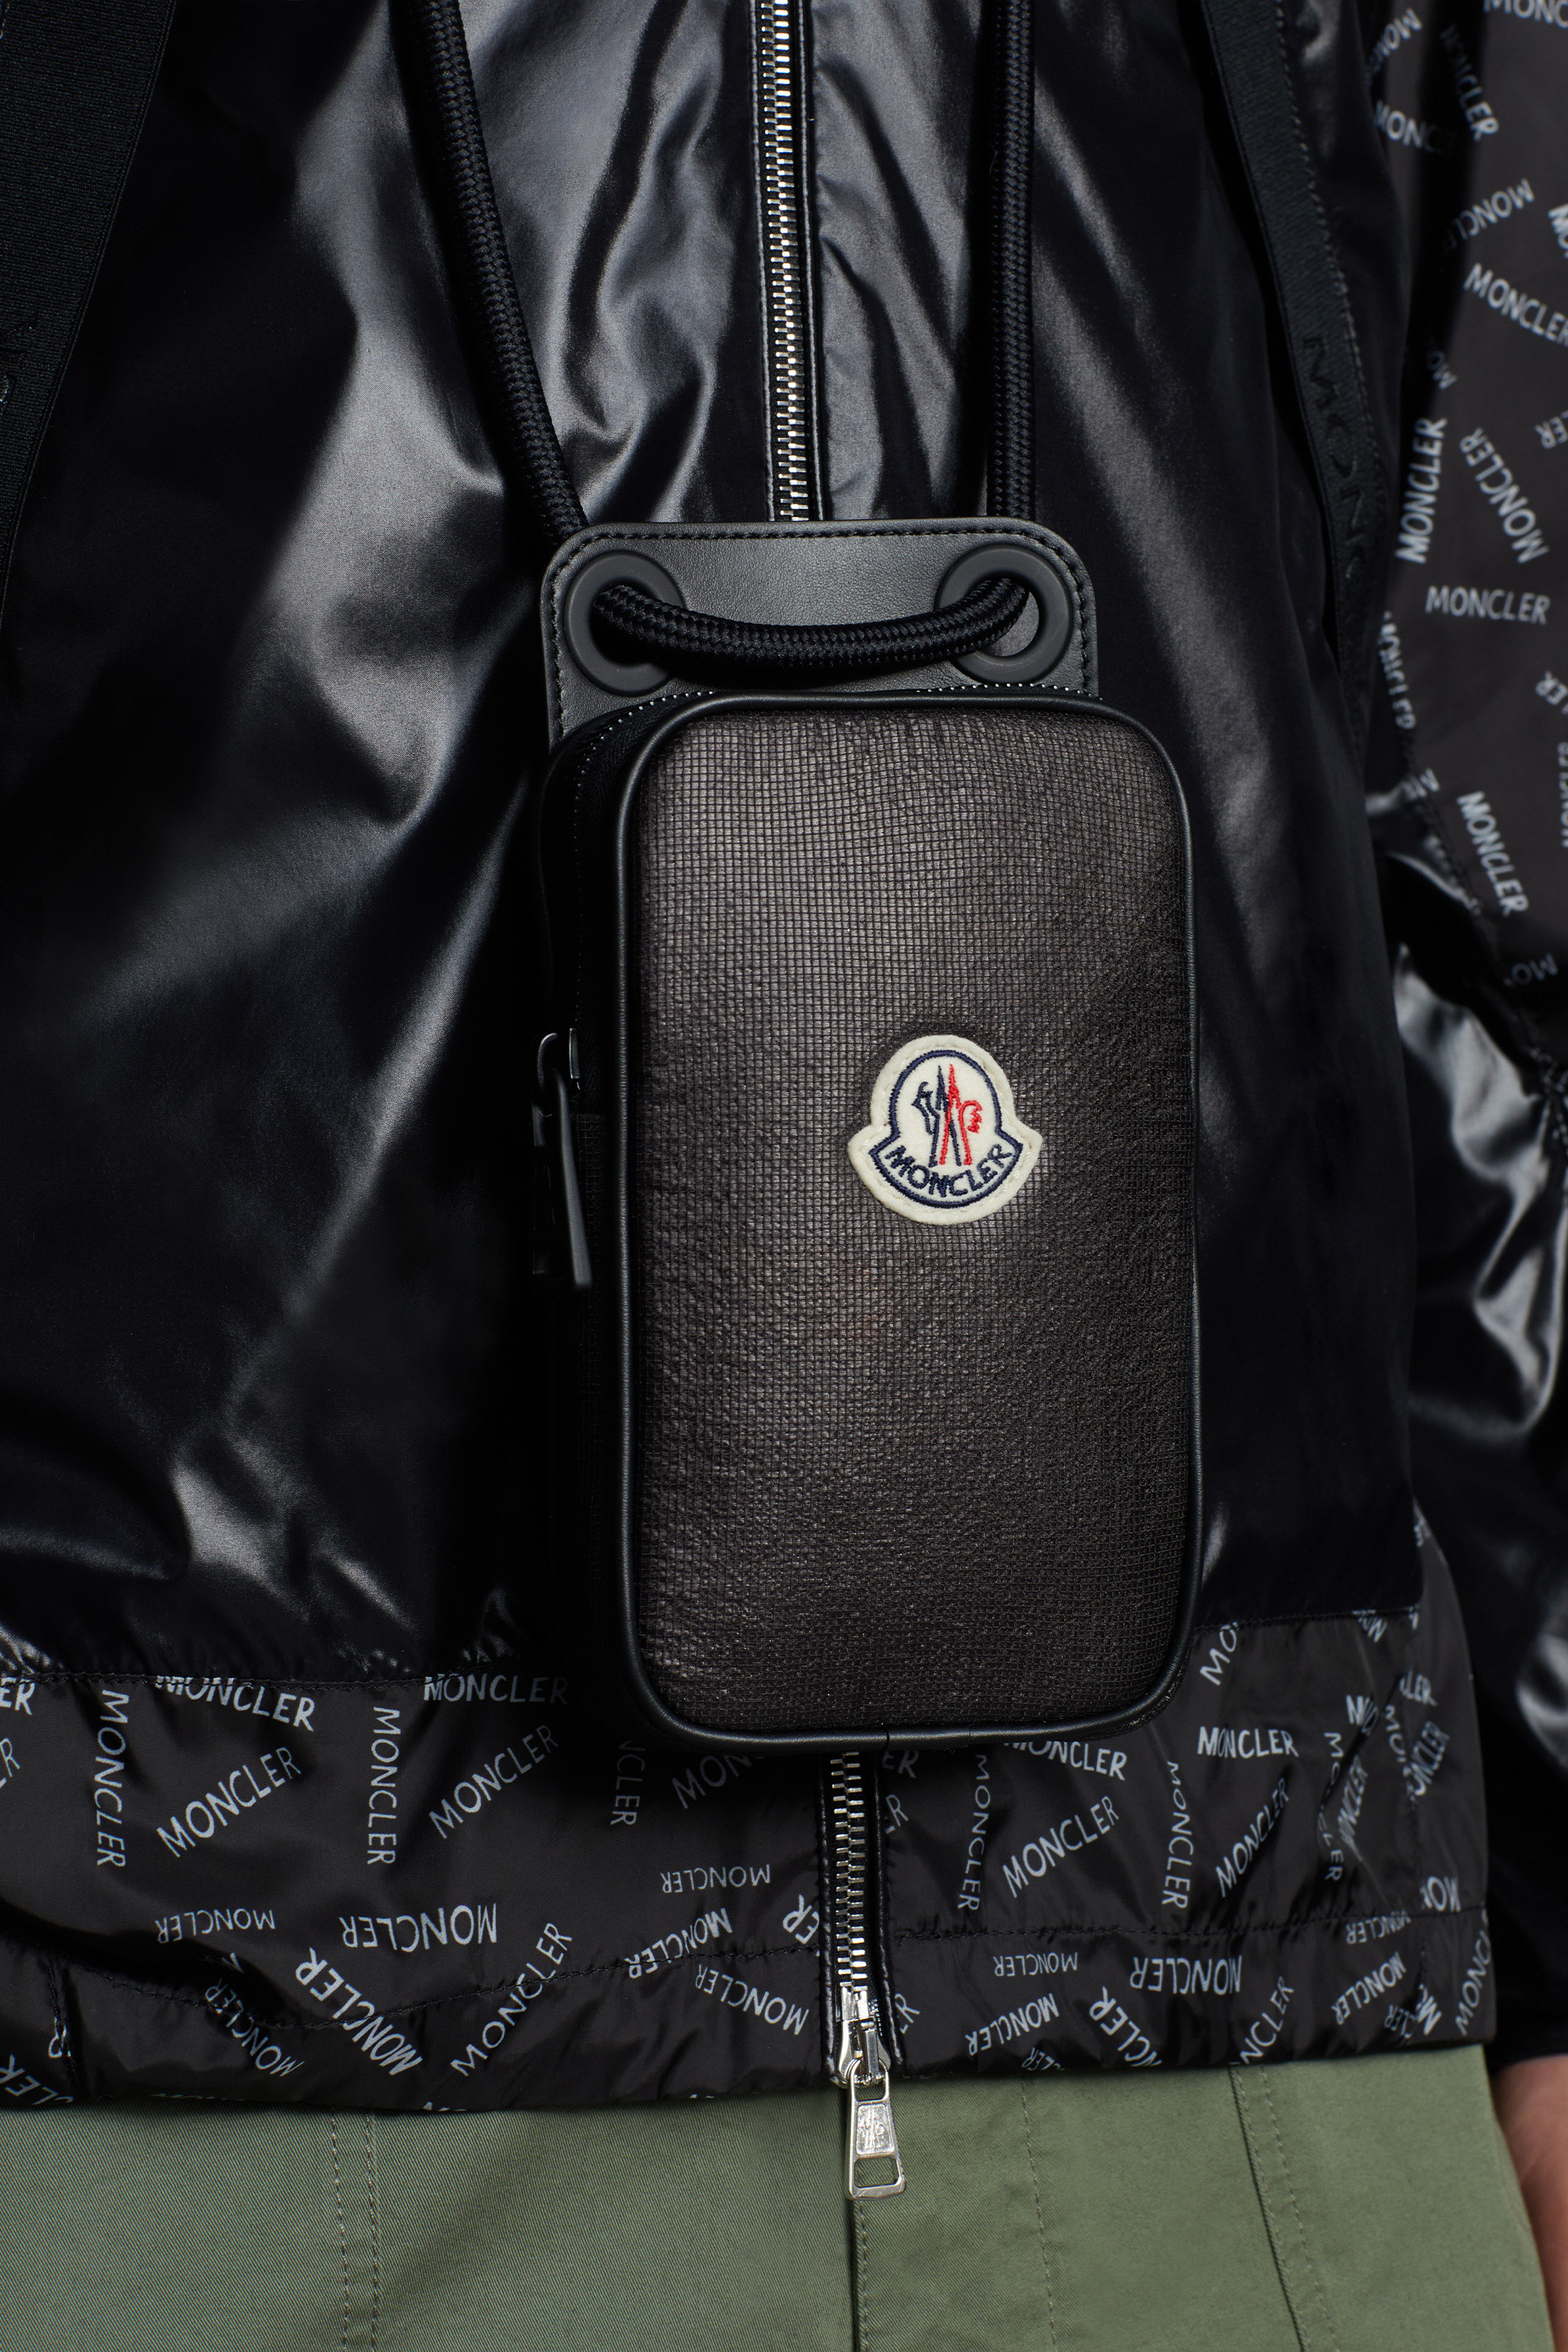 Small Accessories for Men - Wallets & Phone Cases | Moncler US